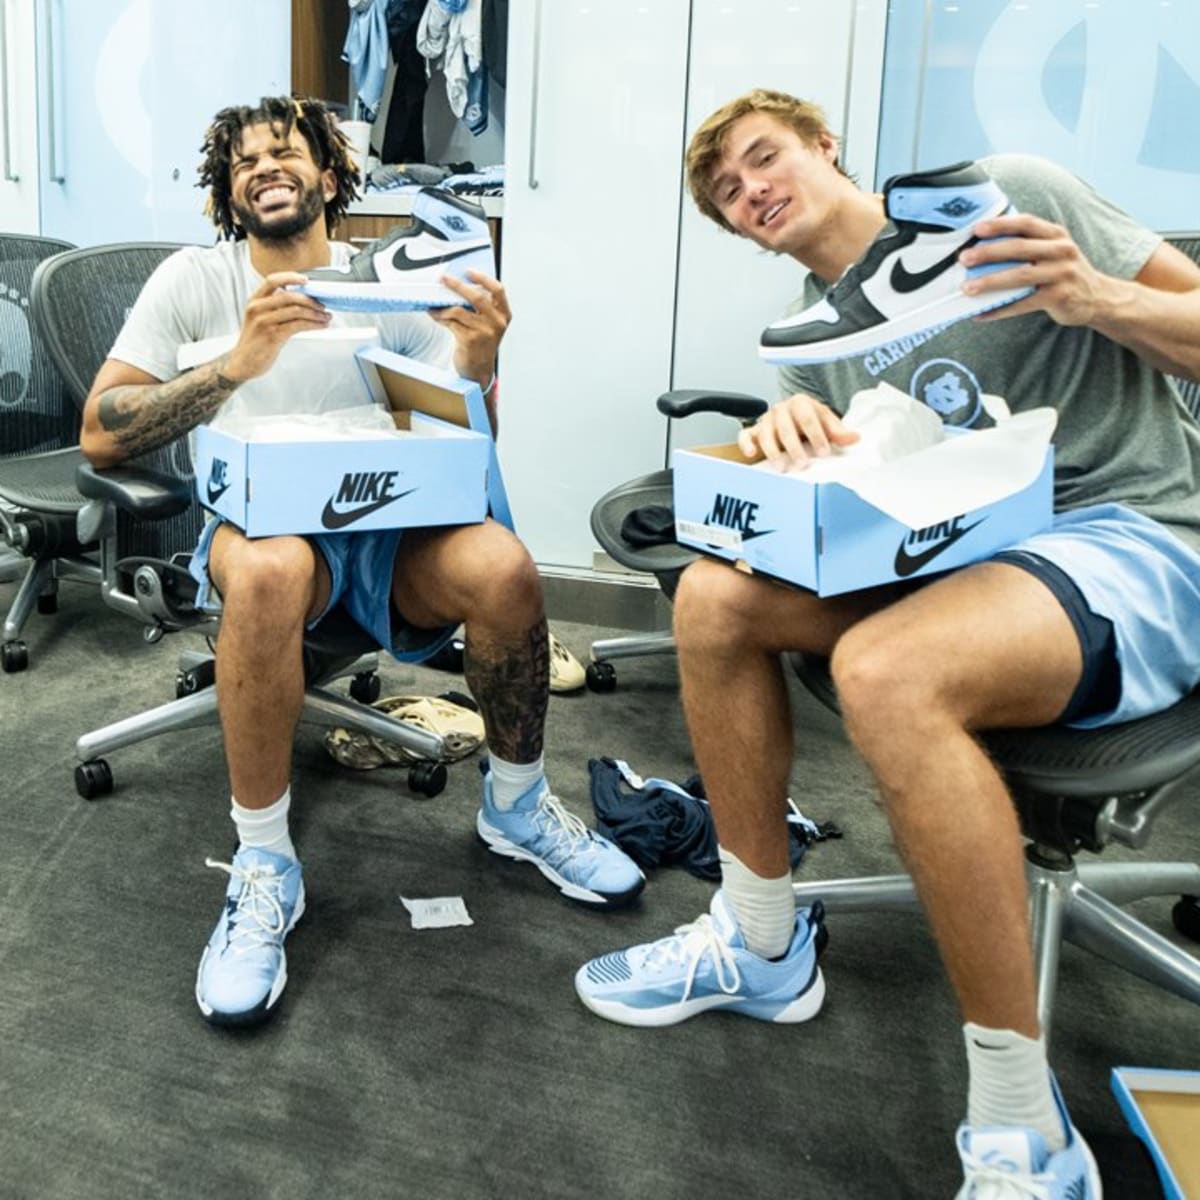 Anyone else having issue with the Jordan UNC jersey not showing